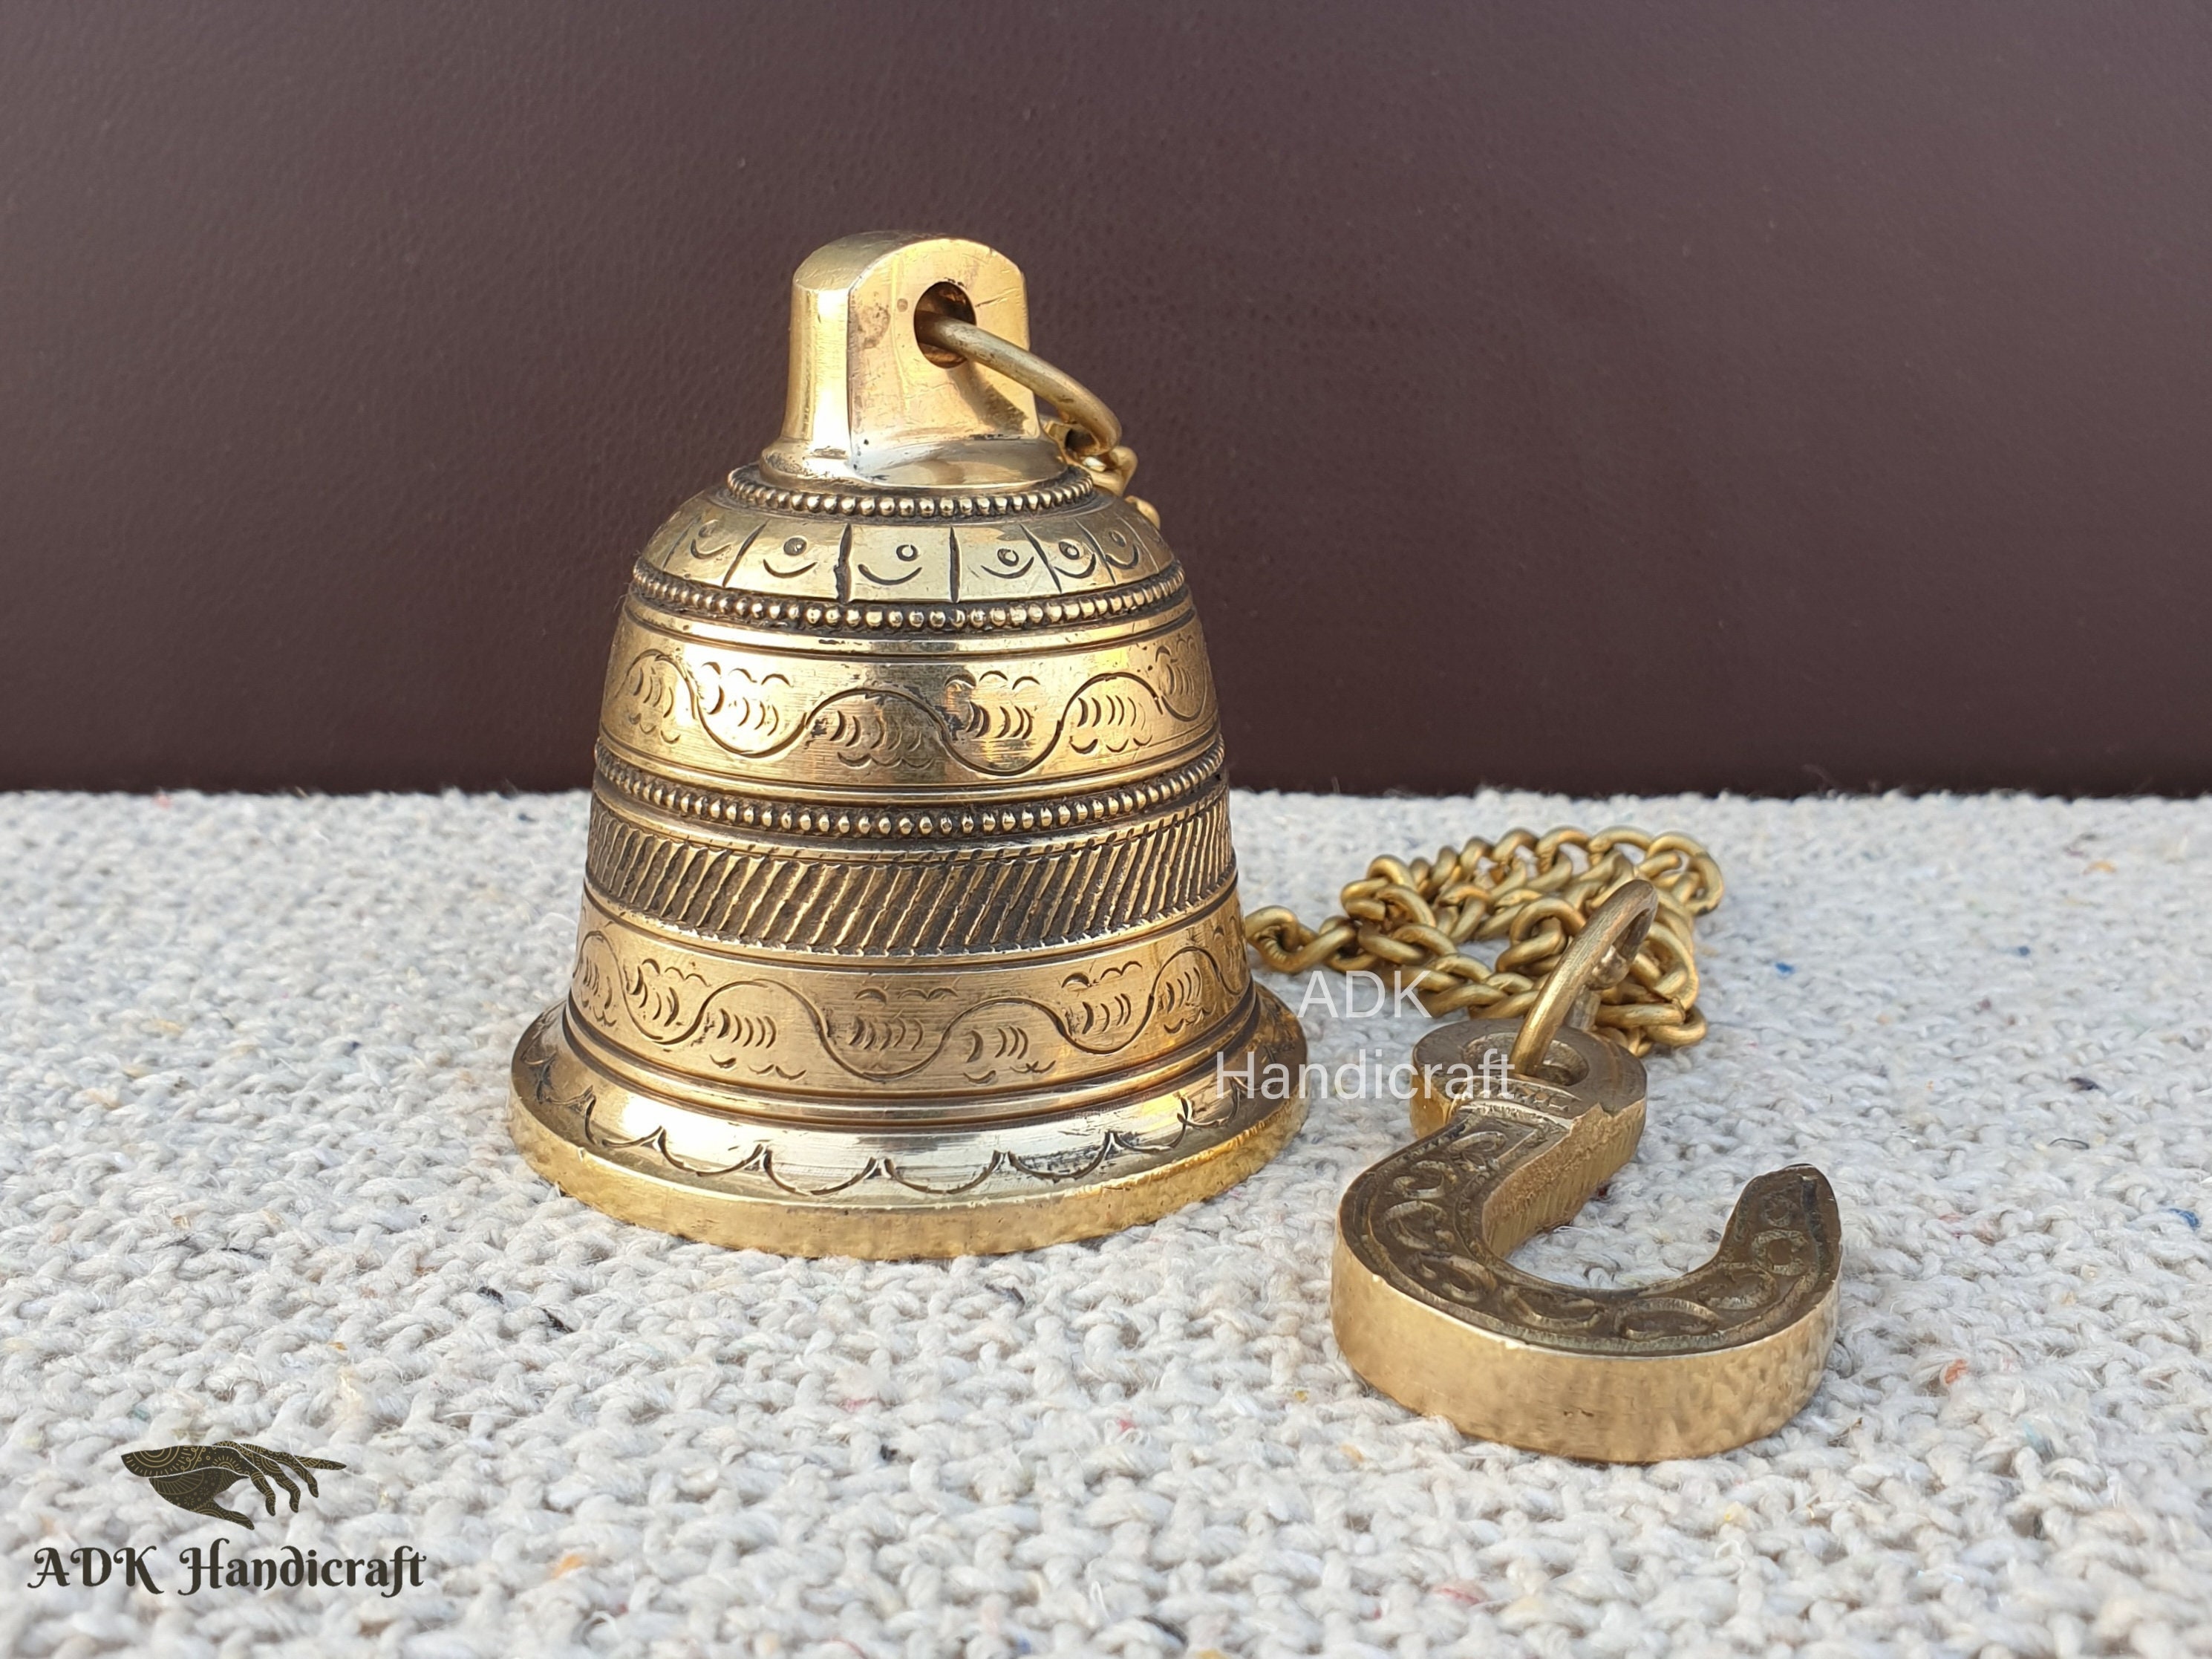 1700's Ancient Brass Hand Forged Hindu Temple Hanging Bell With Hook